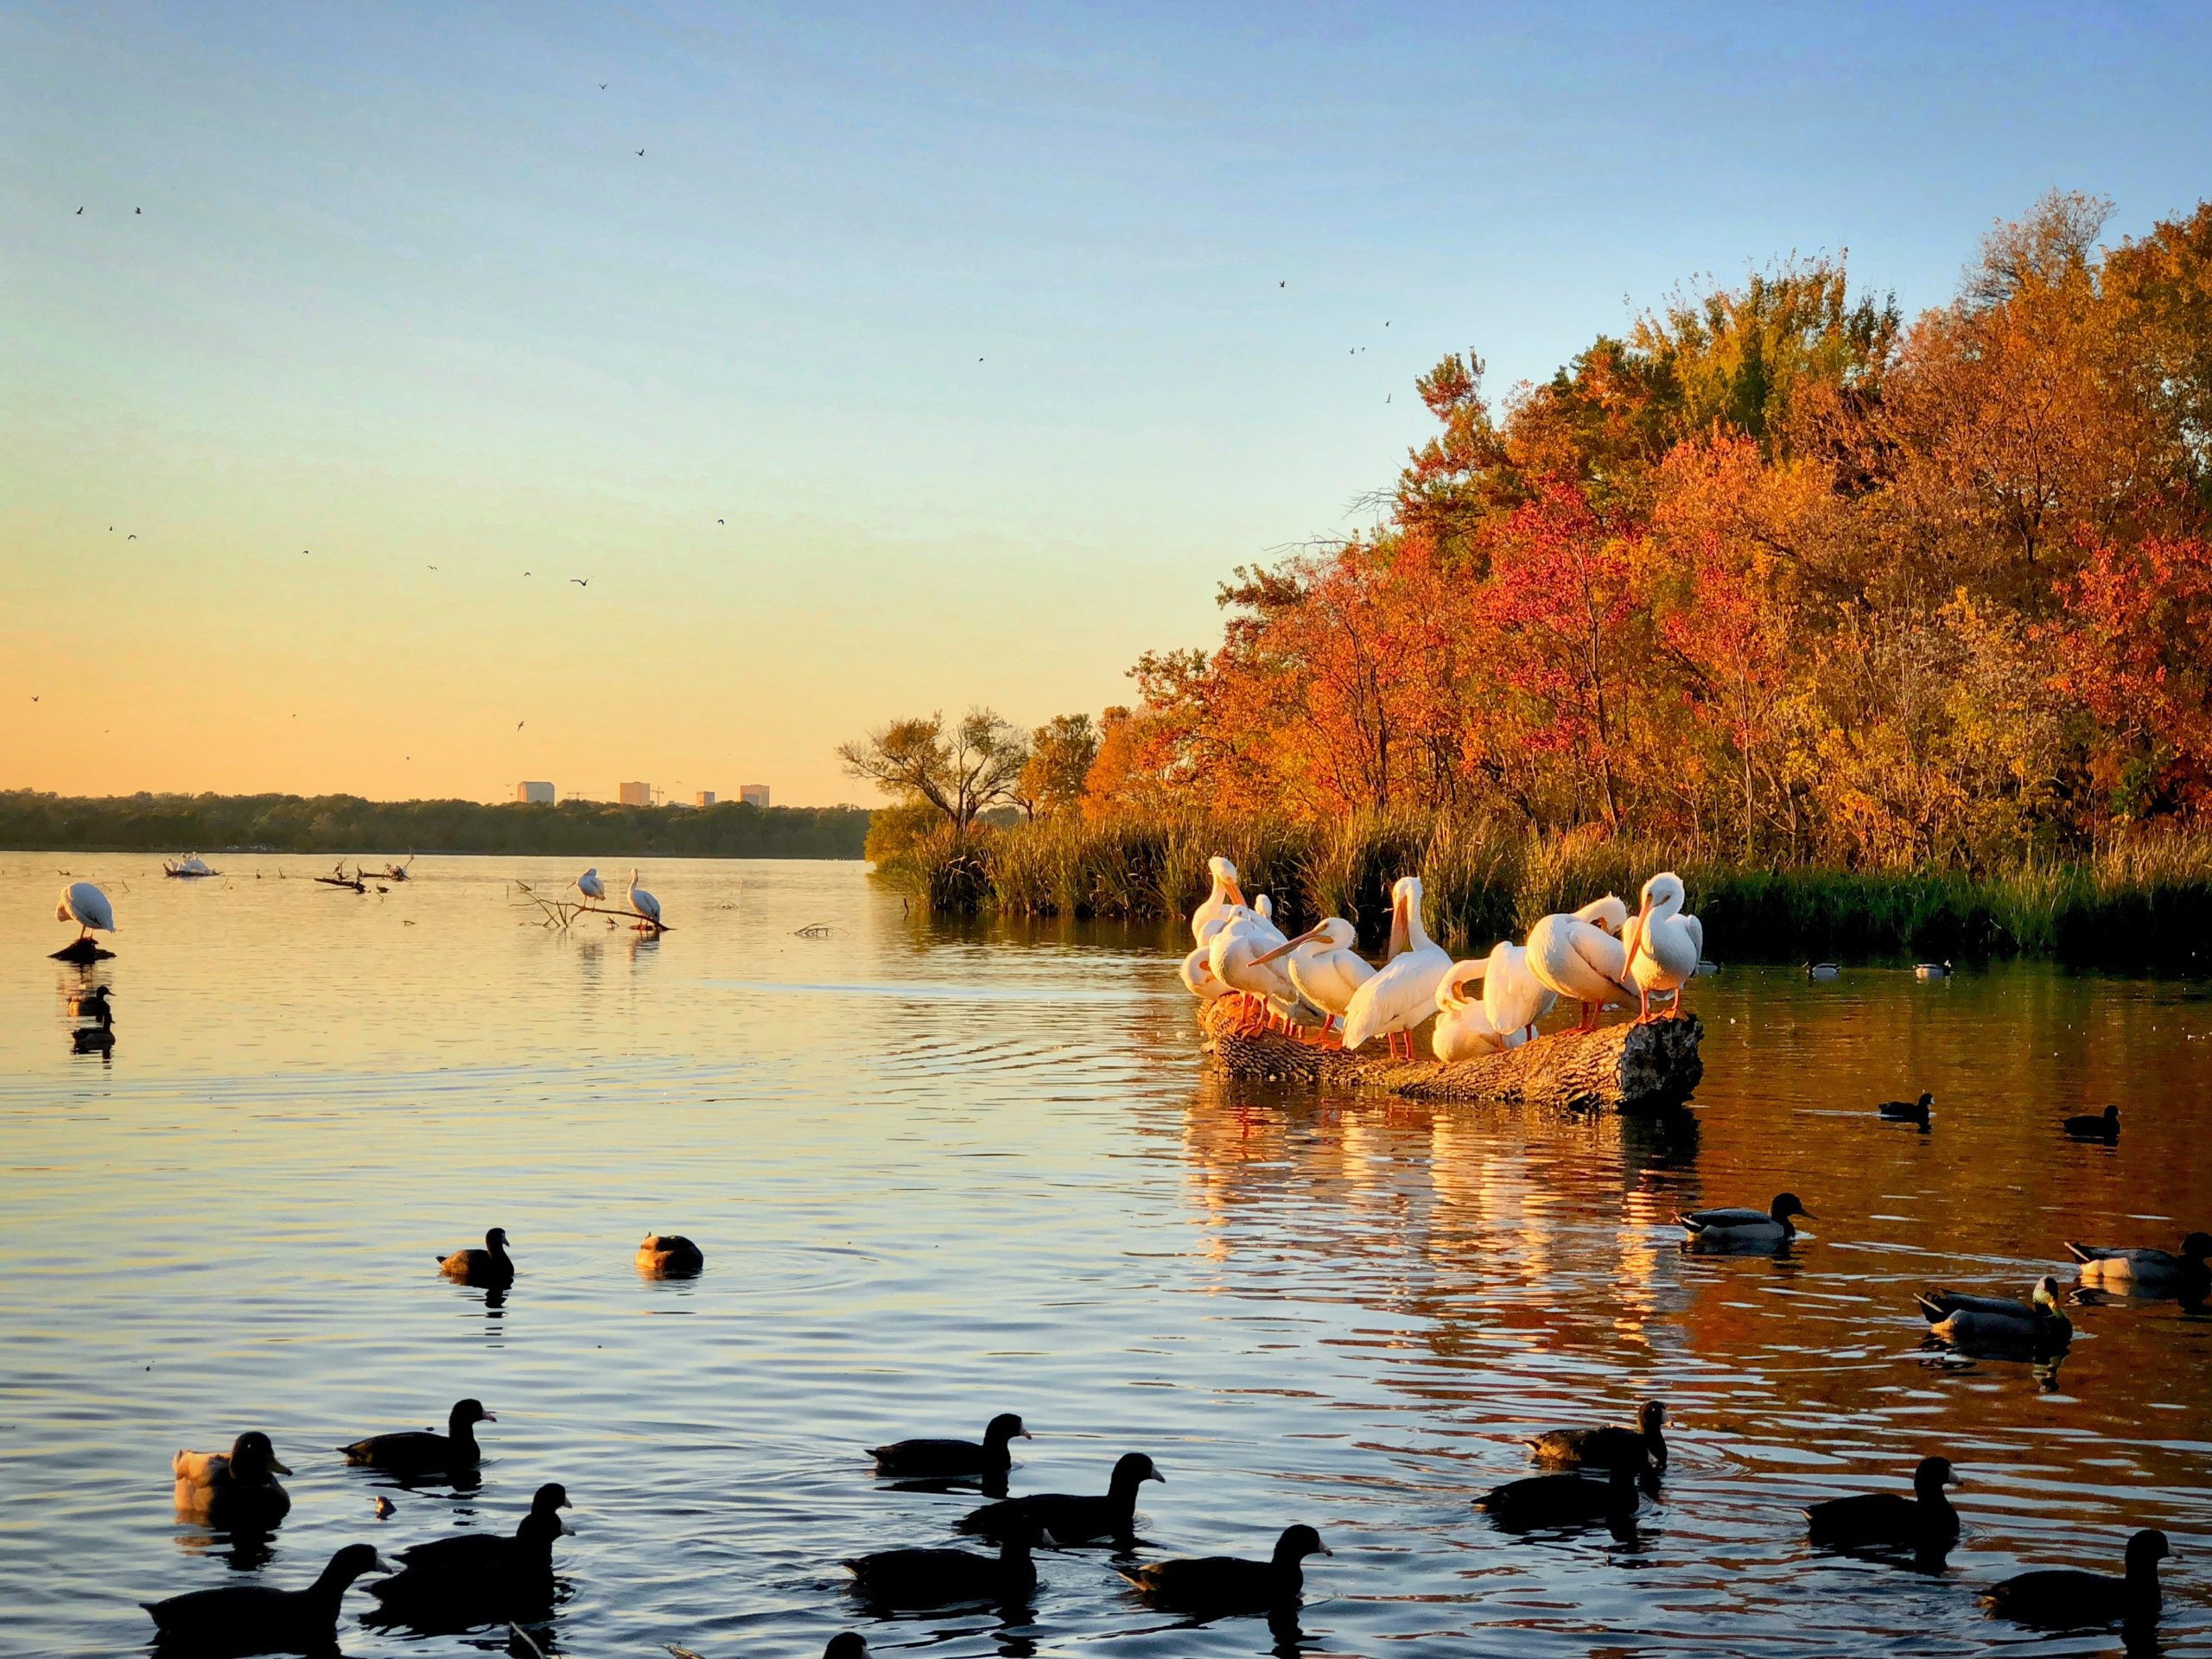 Pelicans and Ducks at White Rock Lake